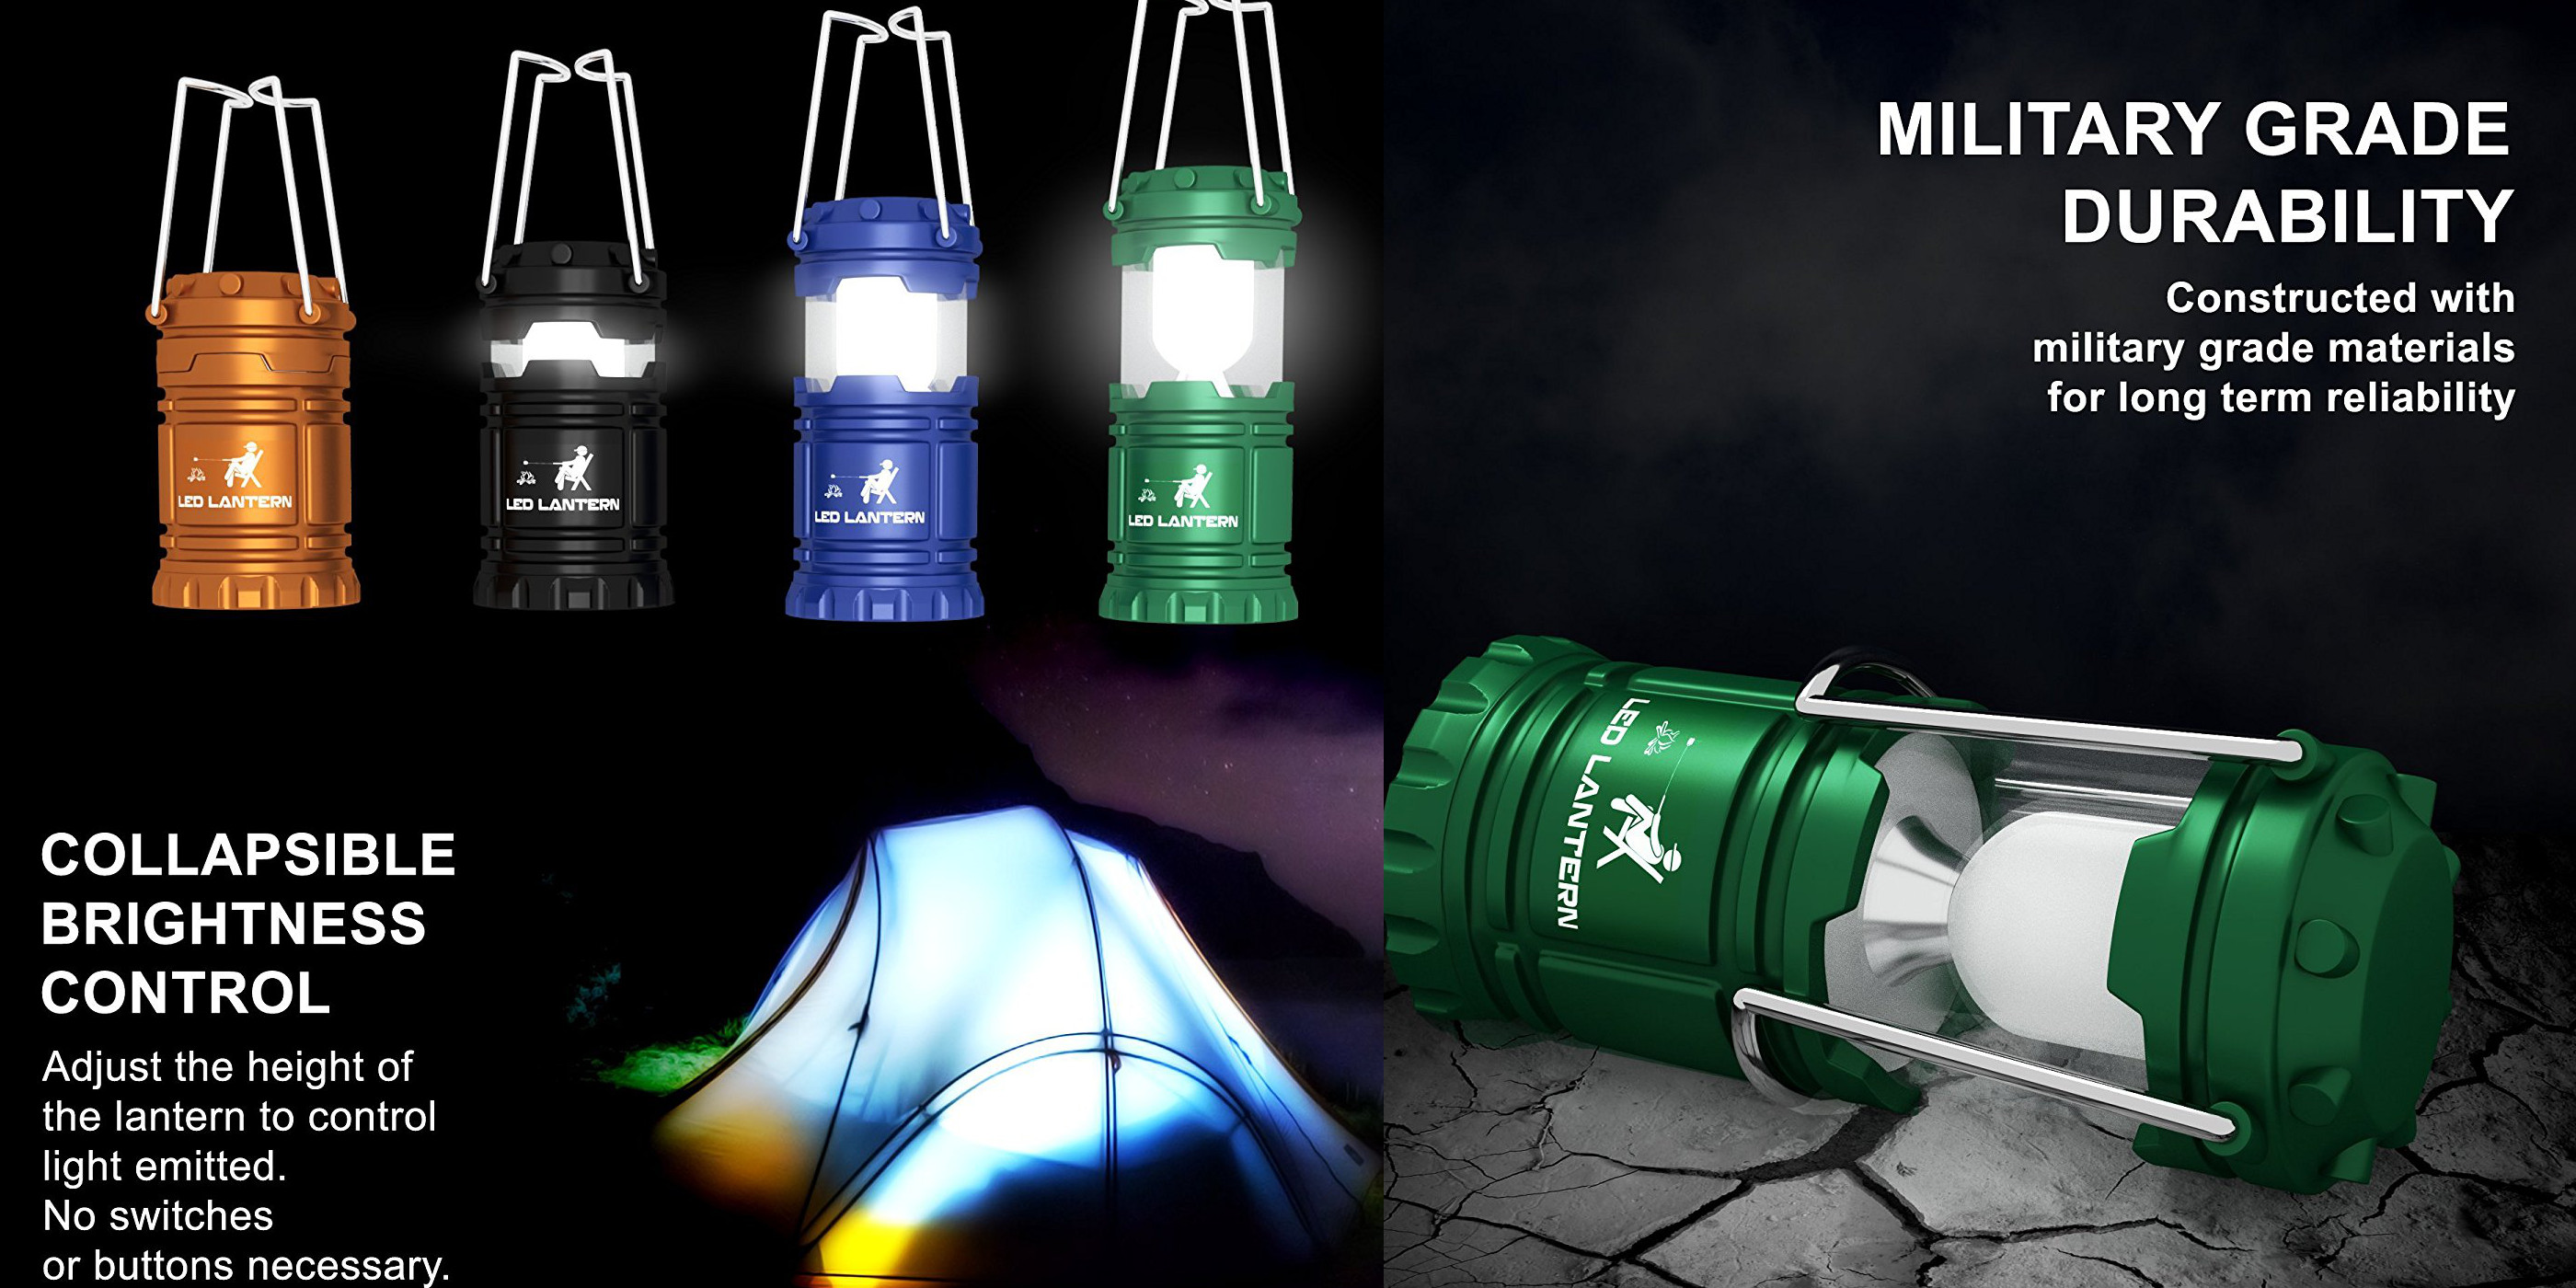 1-day camping gear sale: 4-Pack LED lanterns $16 Prime shipped, more